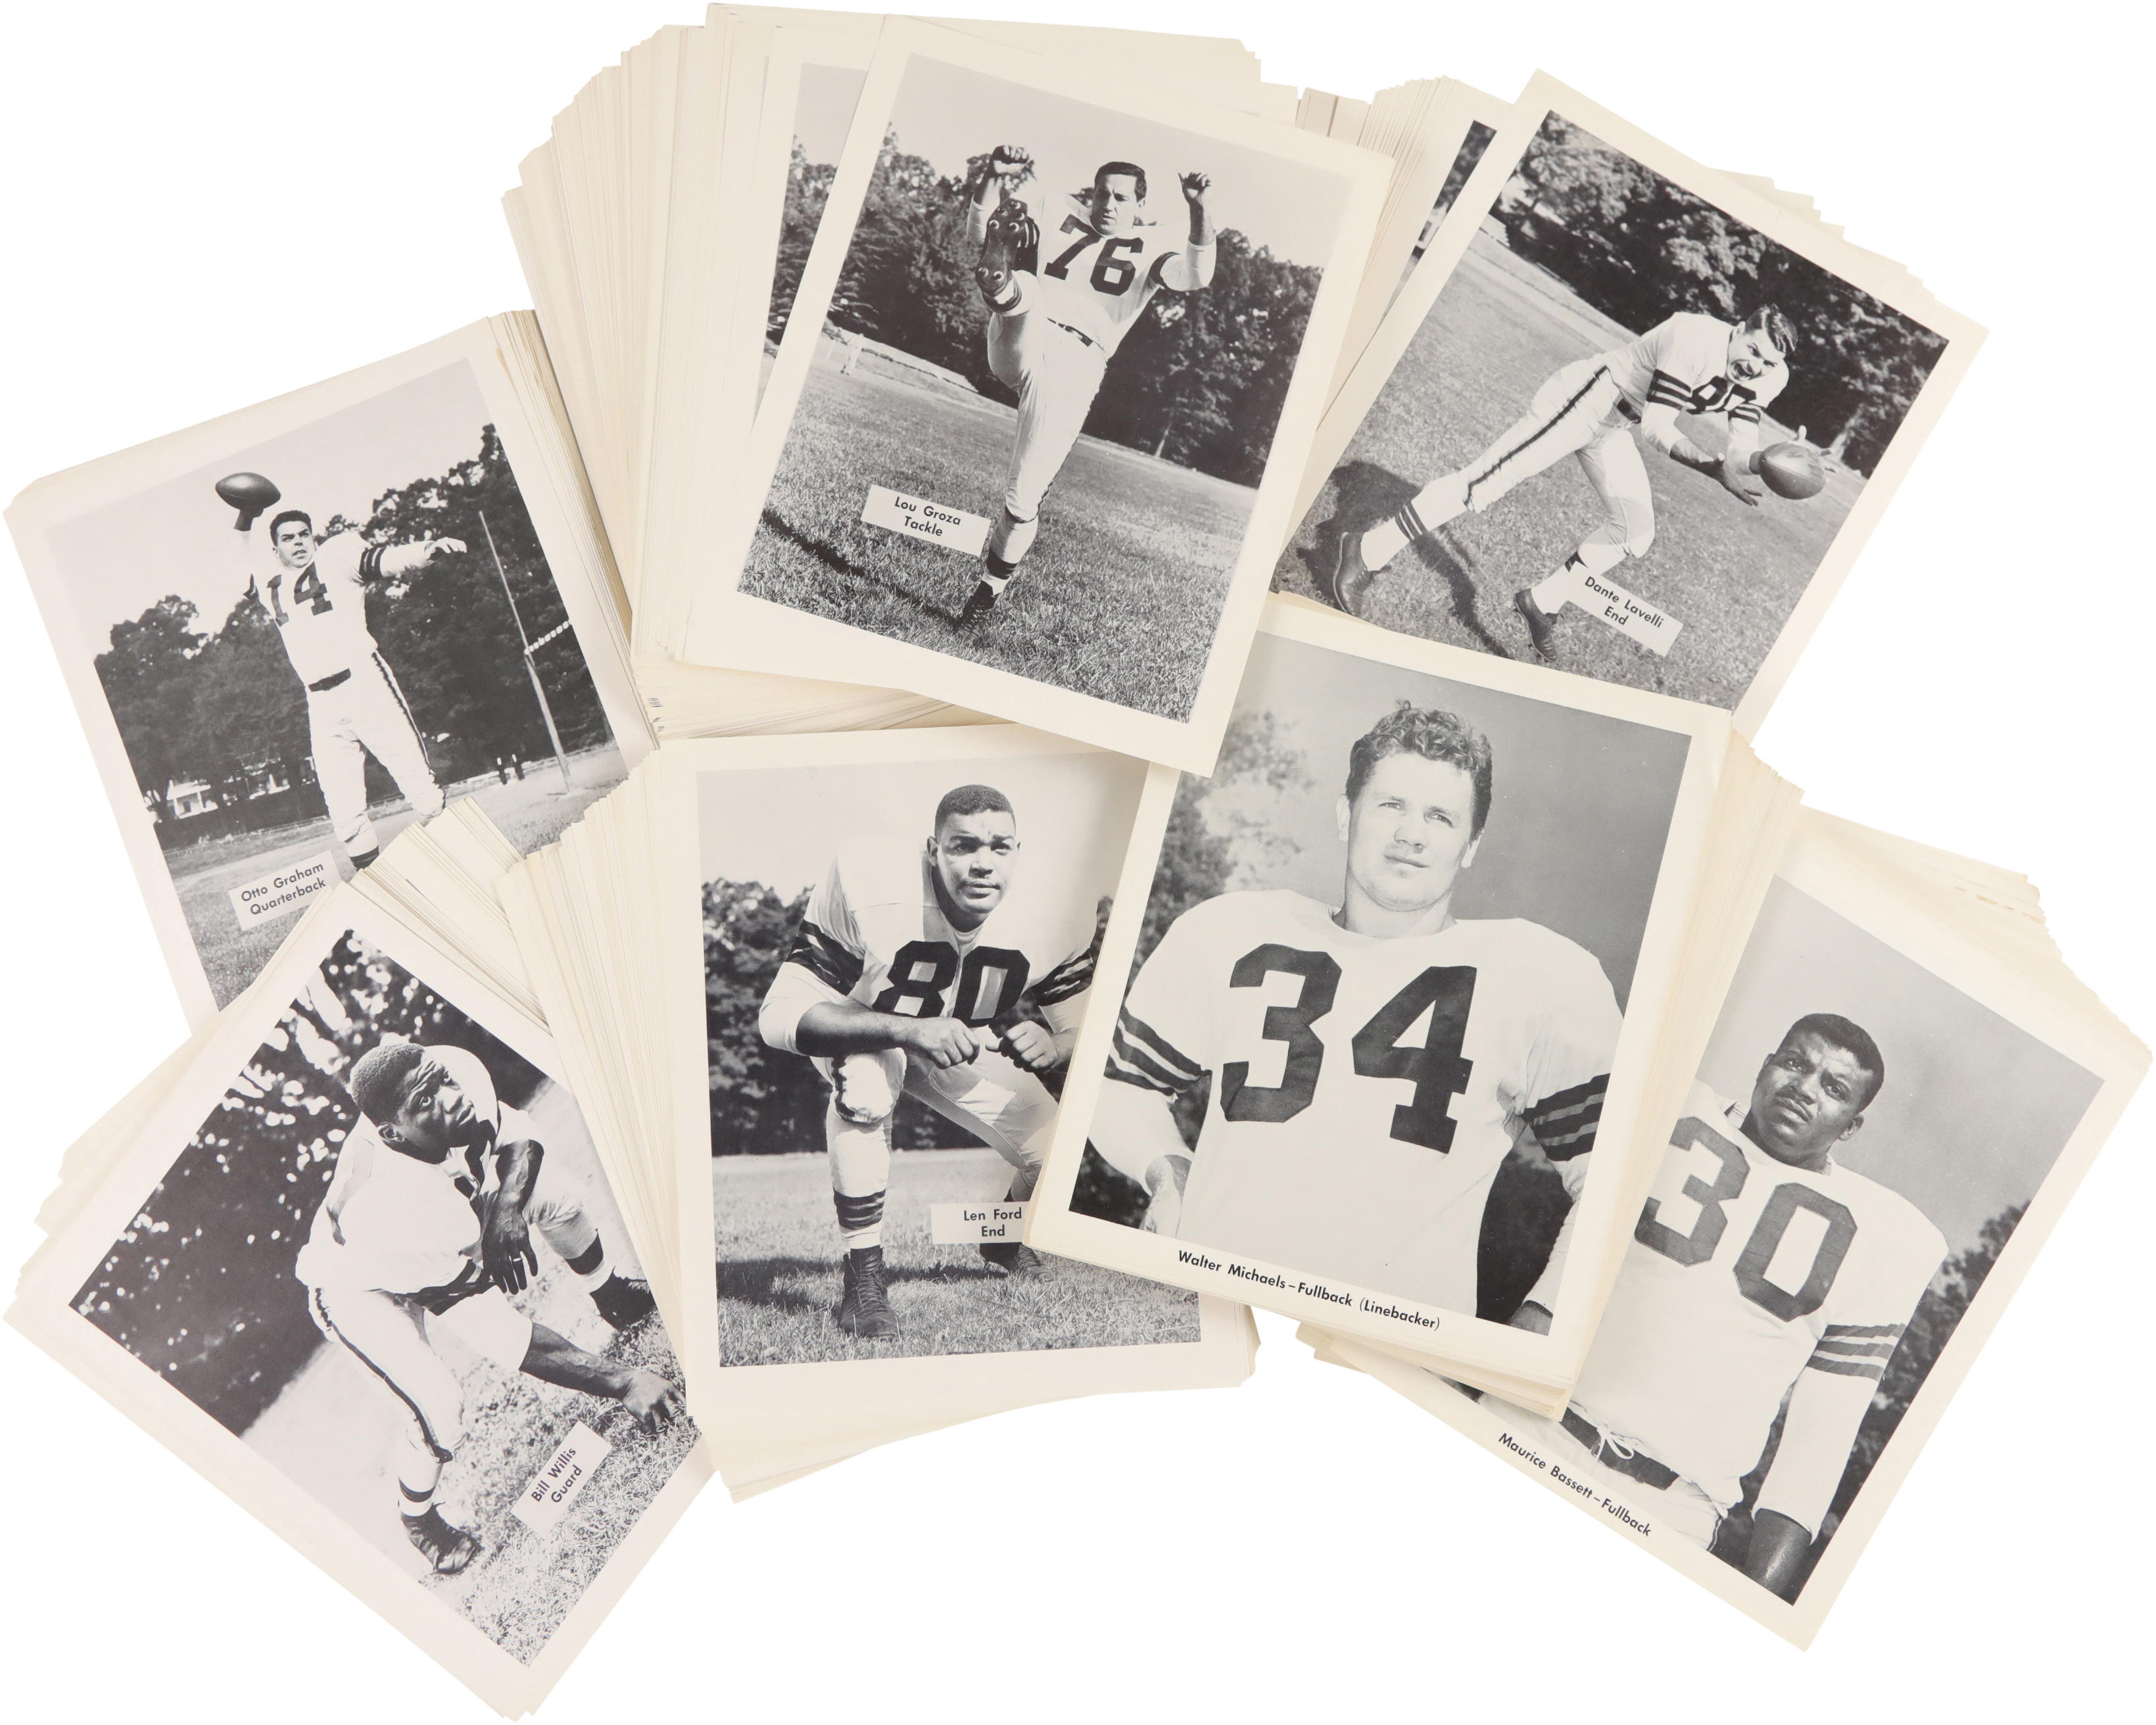 Cleveland sports memorabilia – modern and old – up for auction